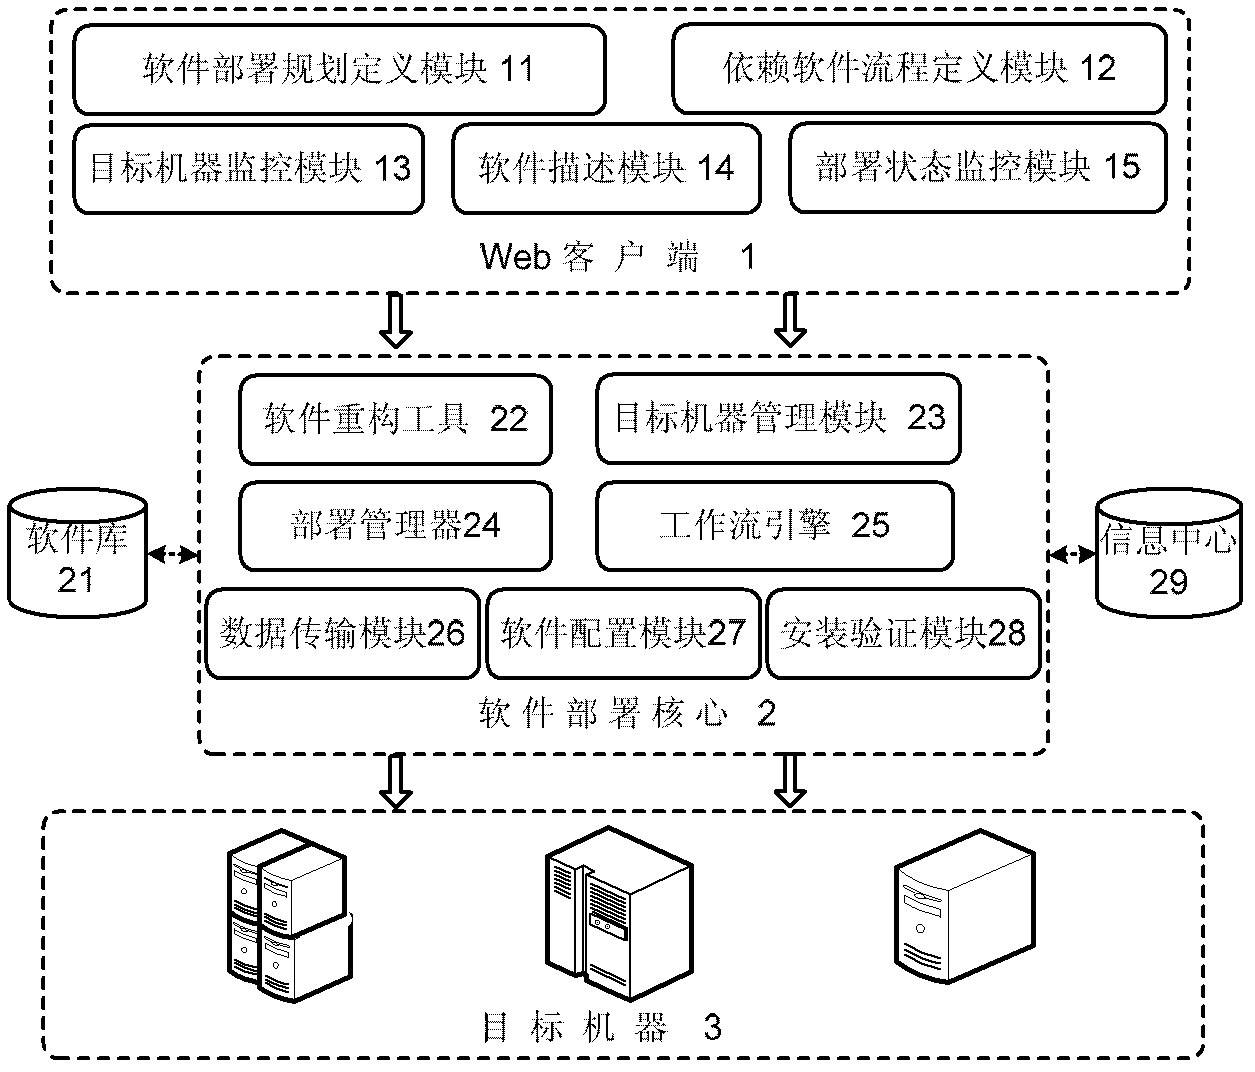 Software deployment system and deployment method based on workflow in cloud computing environment